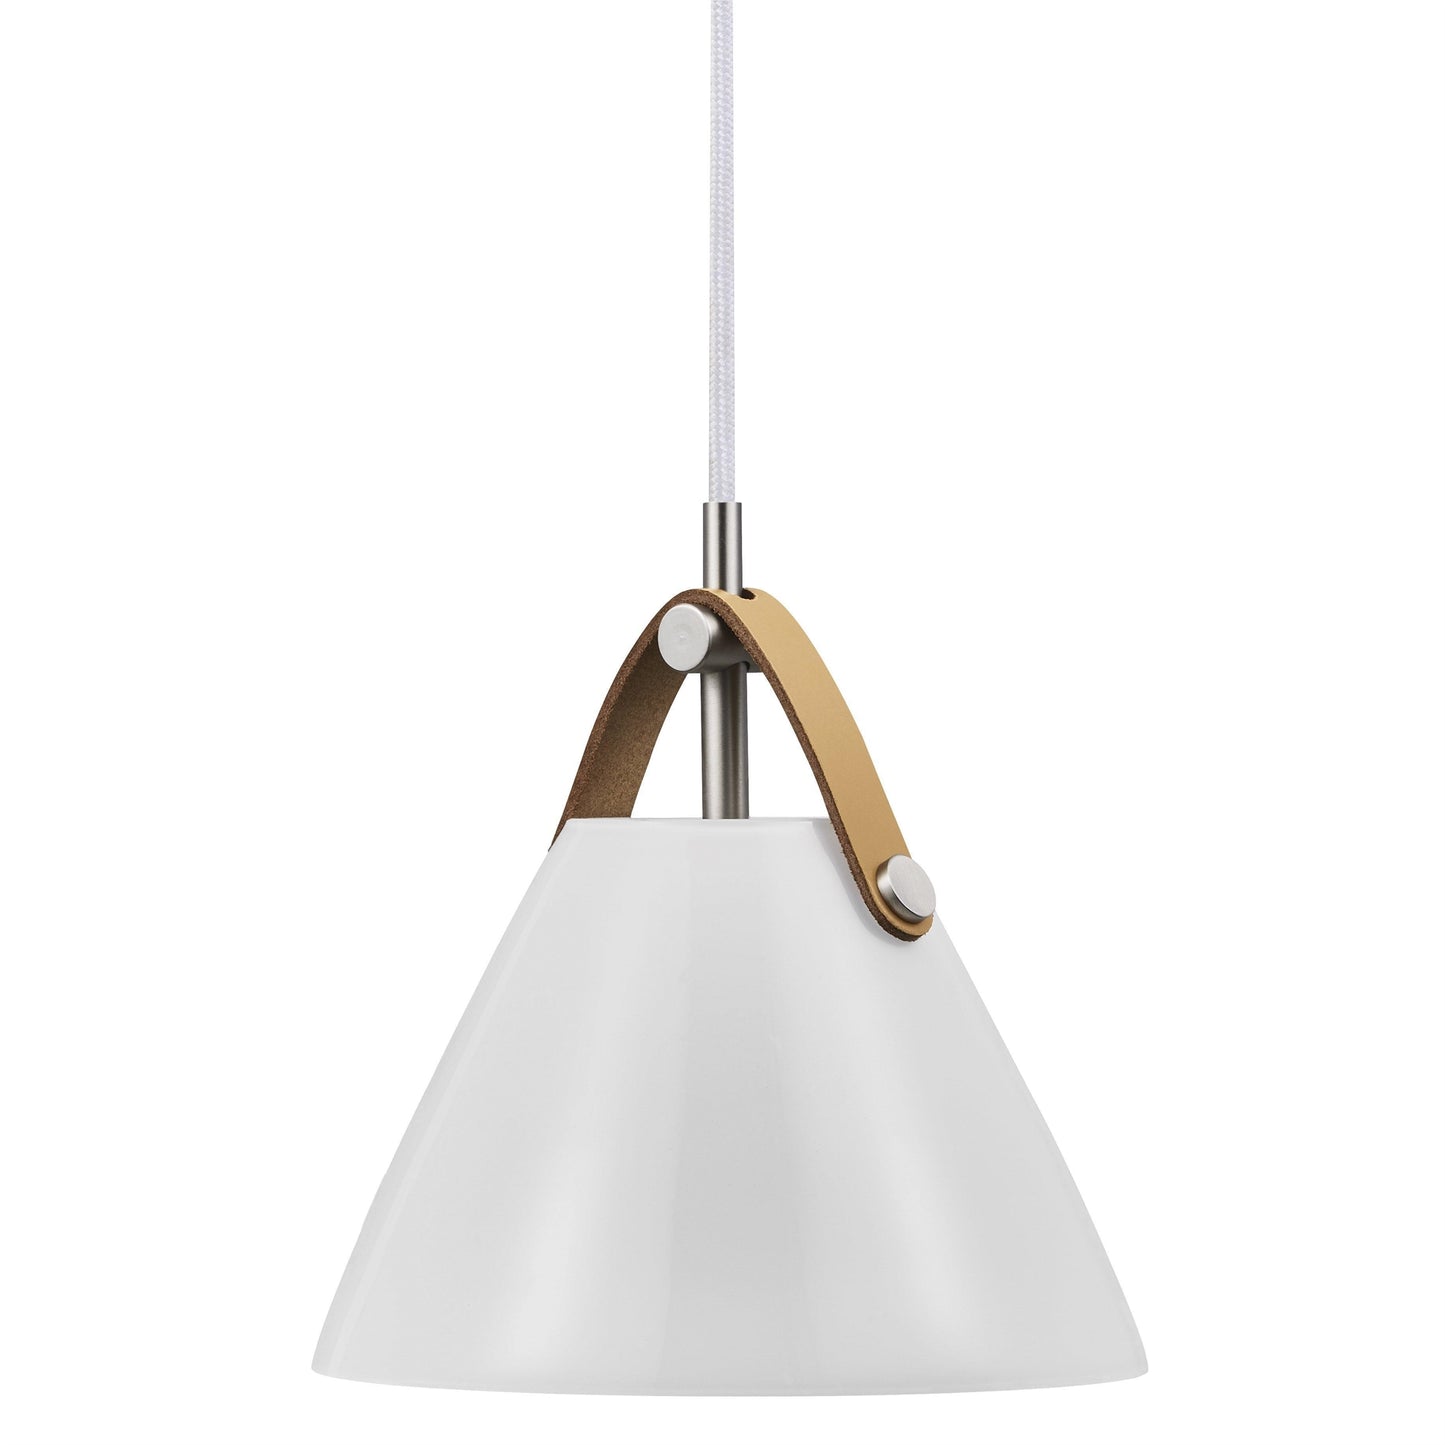 Strap 16 Pendant Lamp by Design For The People #White